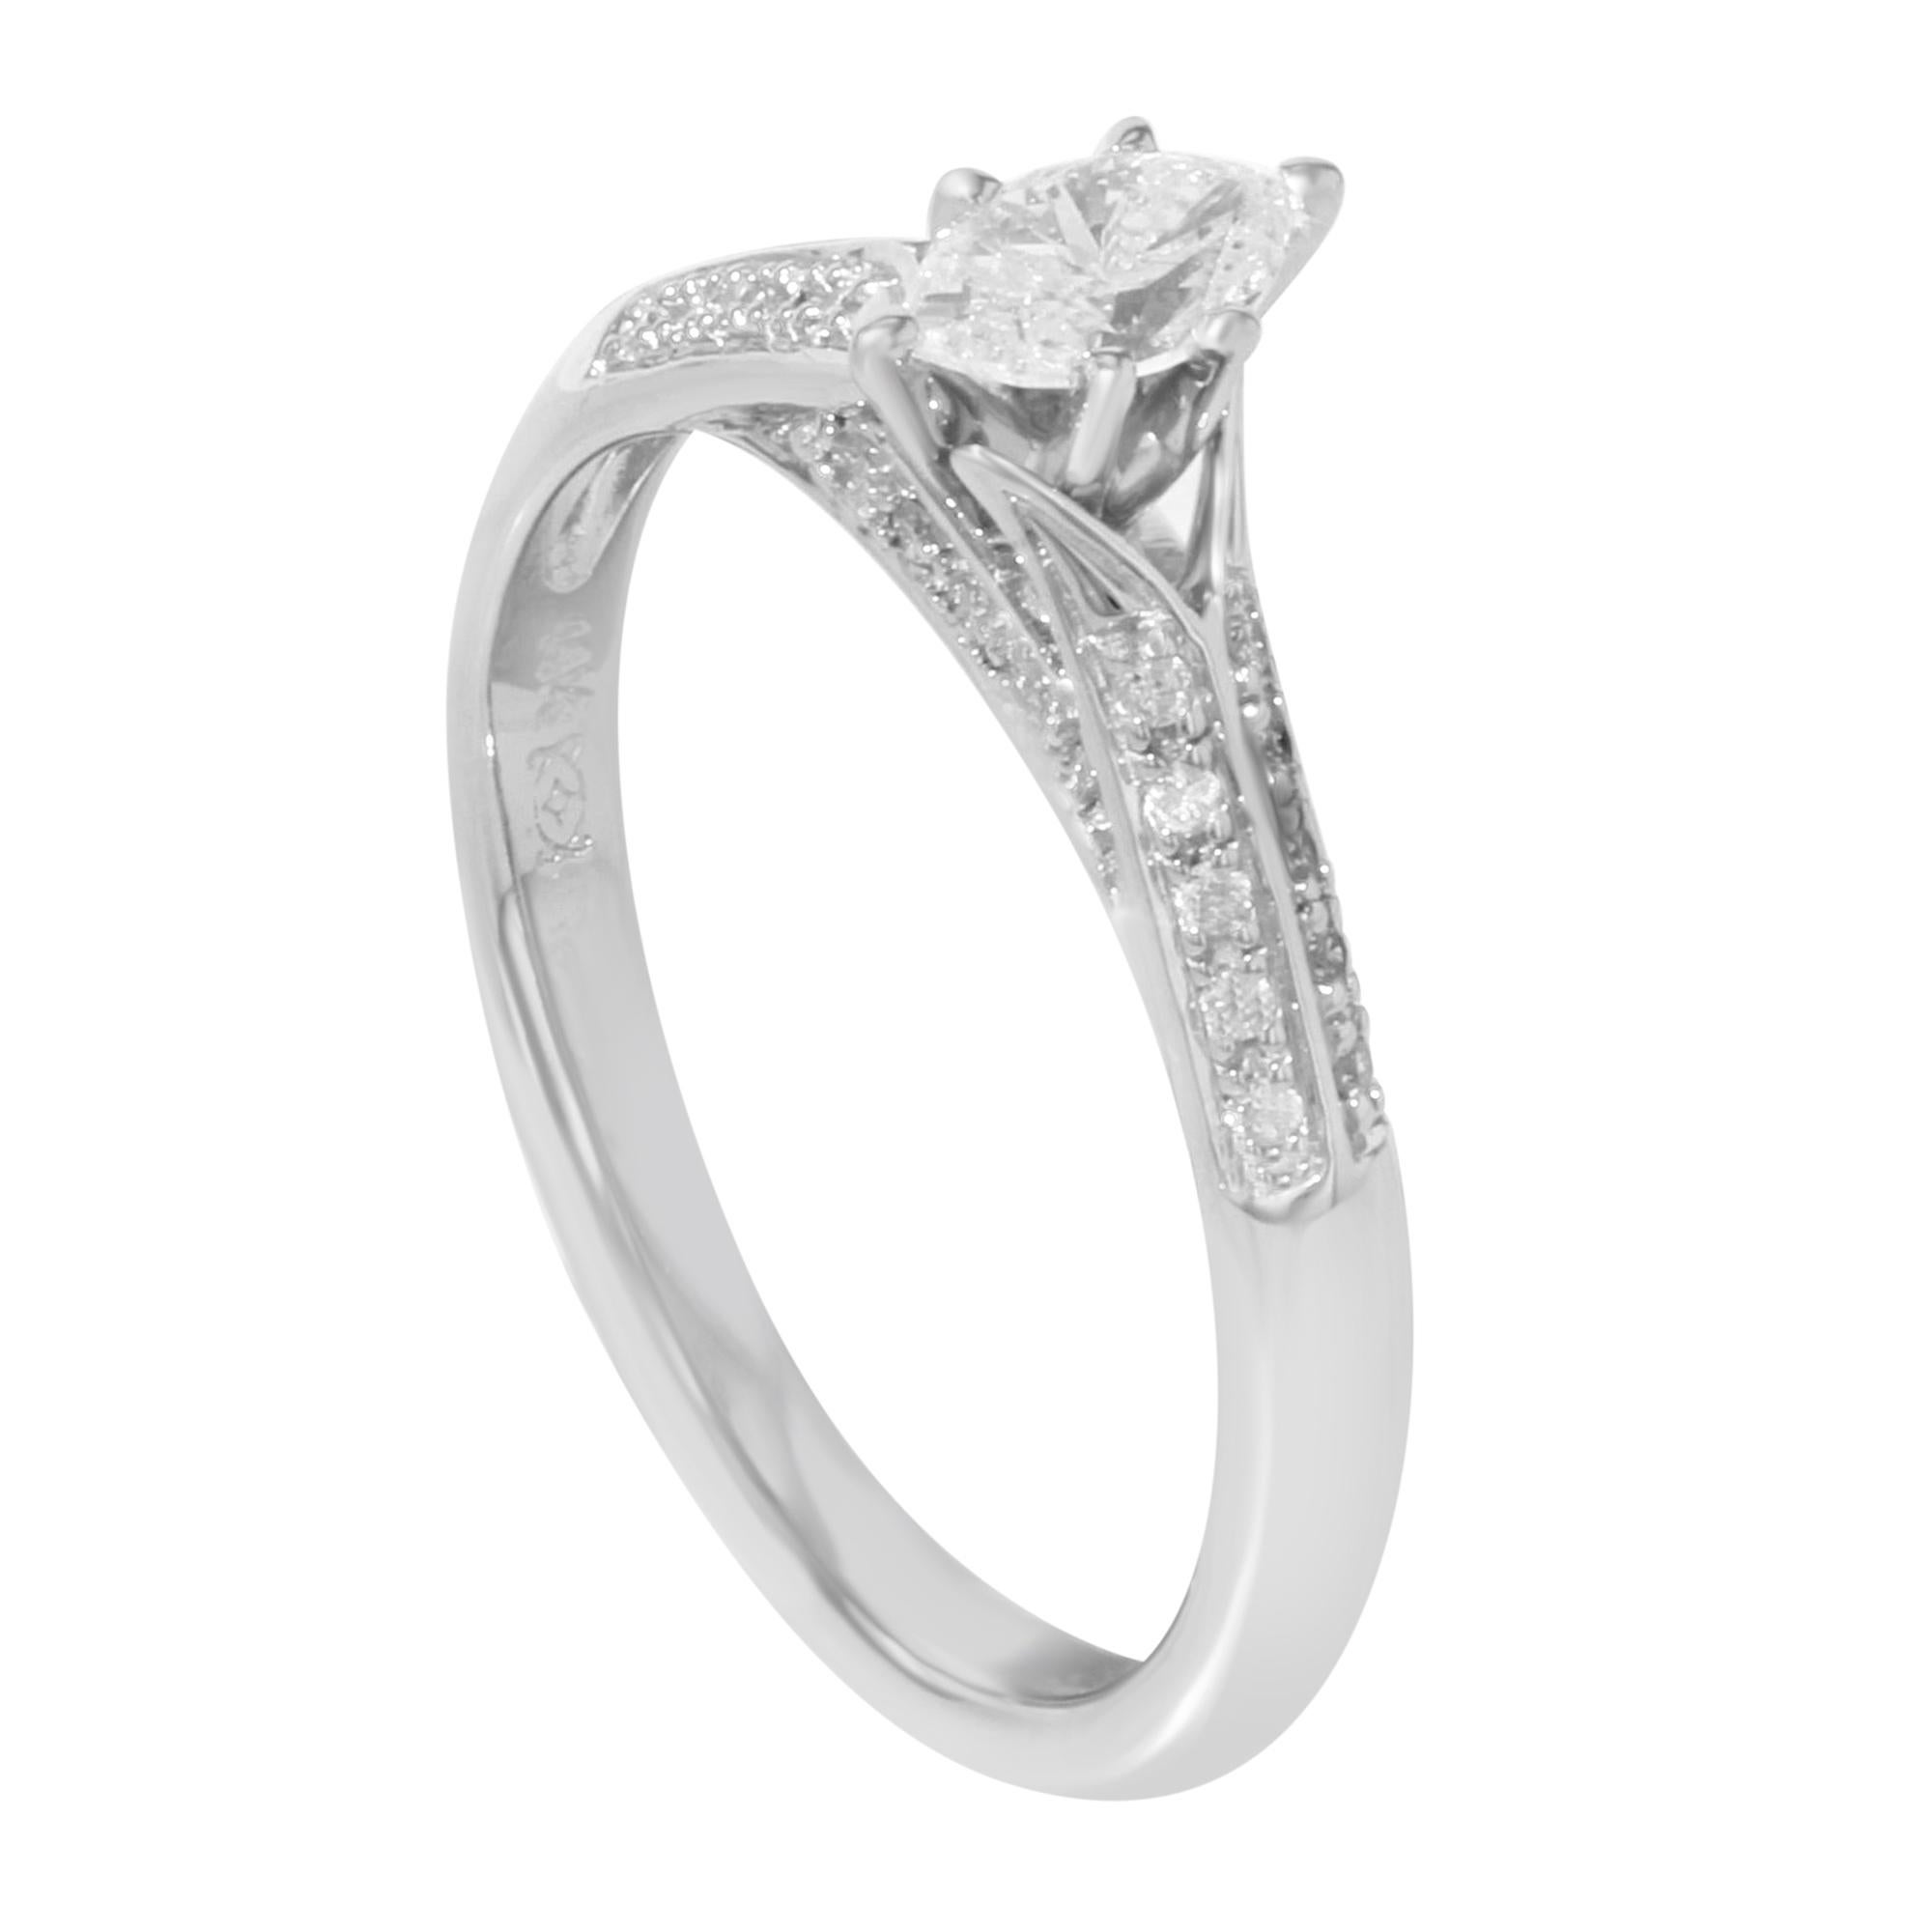 This elegant and alluring ladies' engagement ring is crafted in 14k white gold. Featuring, center prong set marquise cut white diamond with pave set round cut white diamond accents. Total diamond weight: 0.75ct. Ring size 7.25. Total weight: 3.2